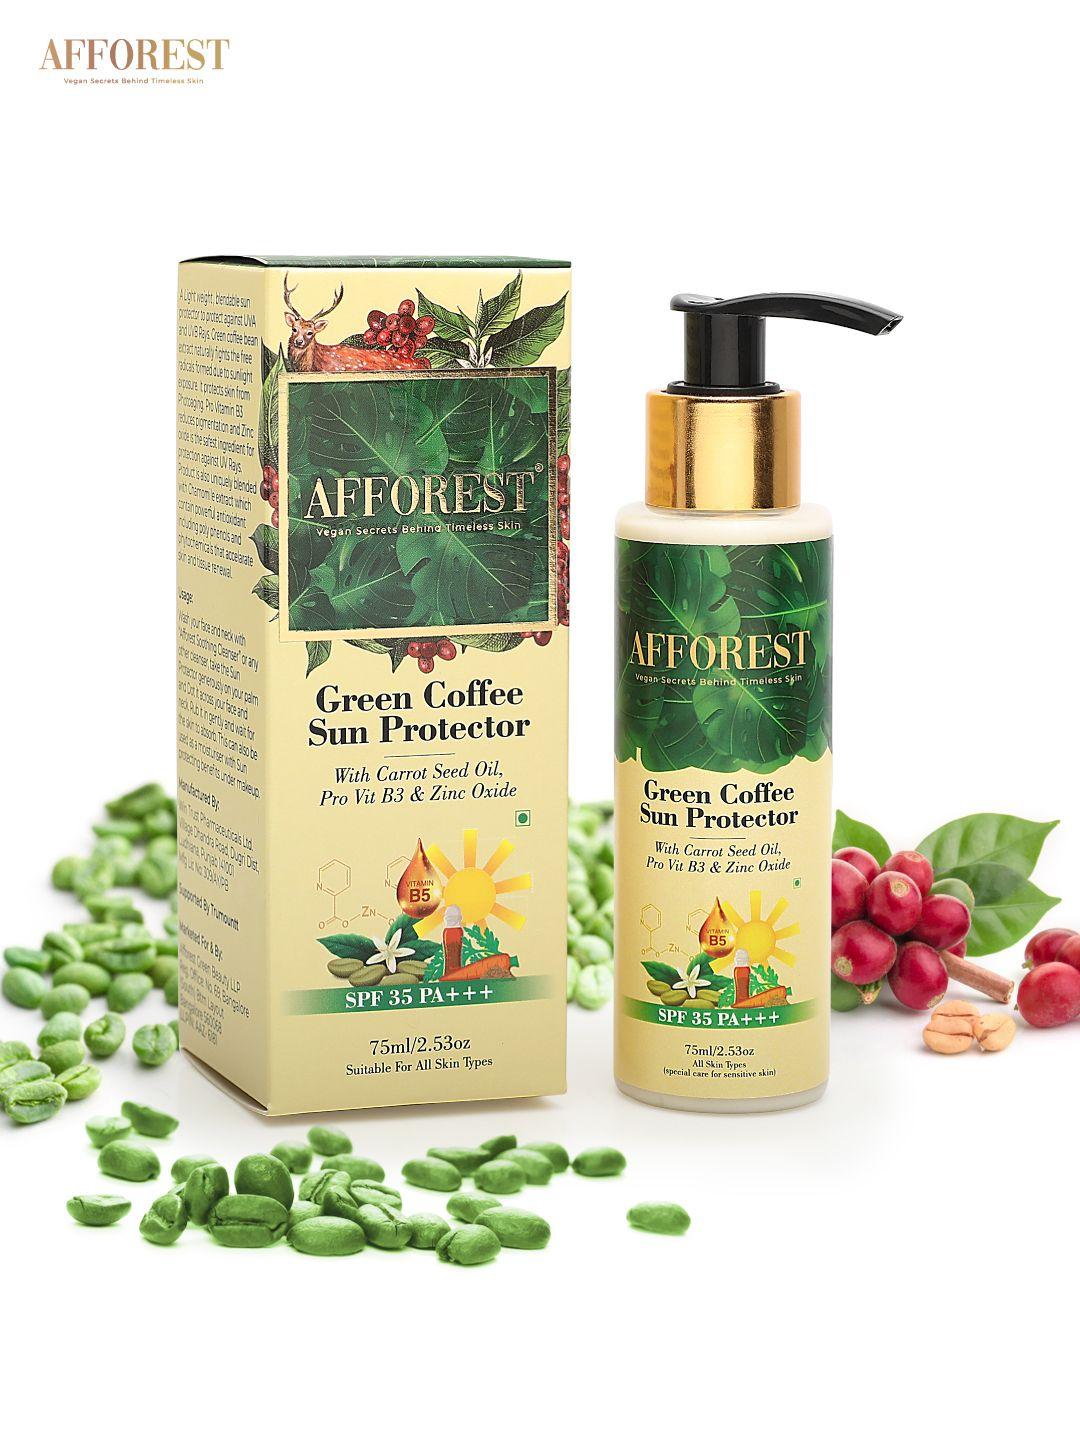 afforest green coffee sun protector sunscreen with carrot seed oil - 75 ml